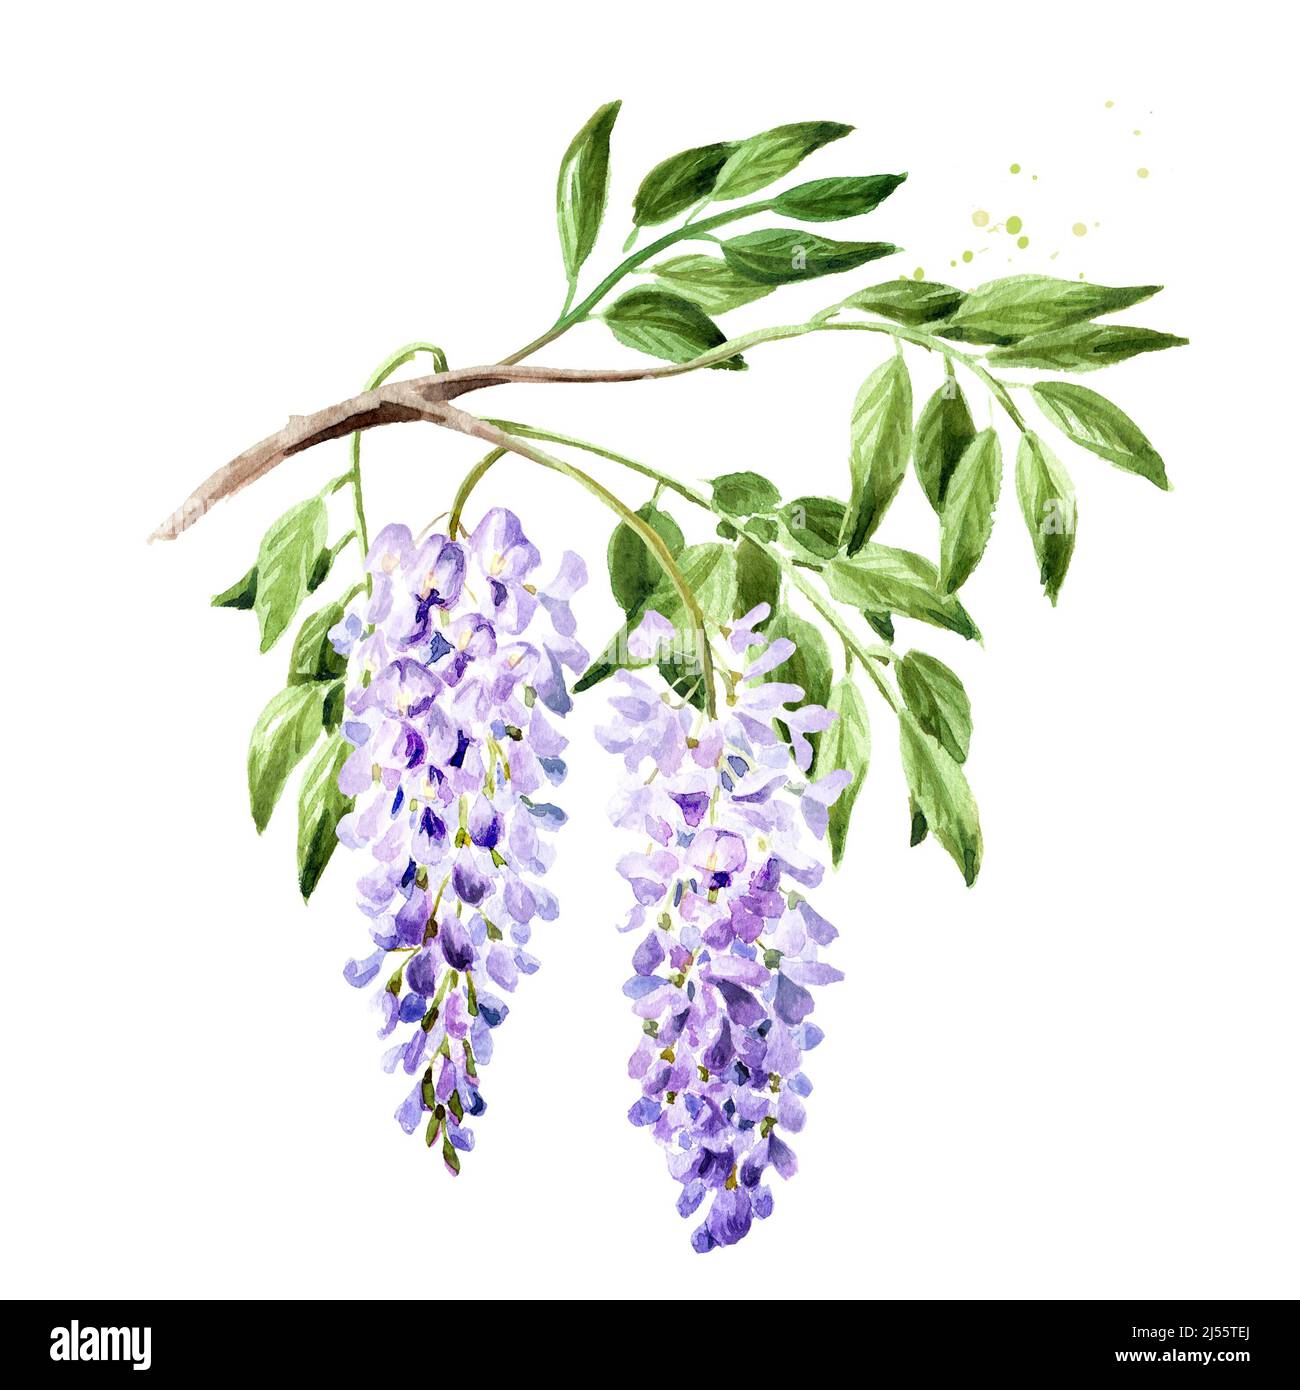 Purple pink blue wisteria flower  blossom branch. Hand drawn watercolor illustration isolated on white background Stock Photo